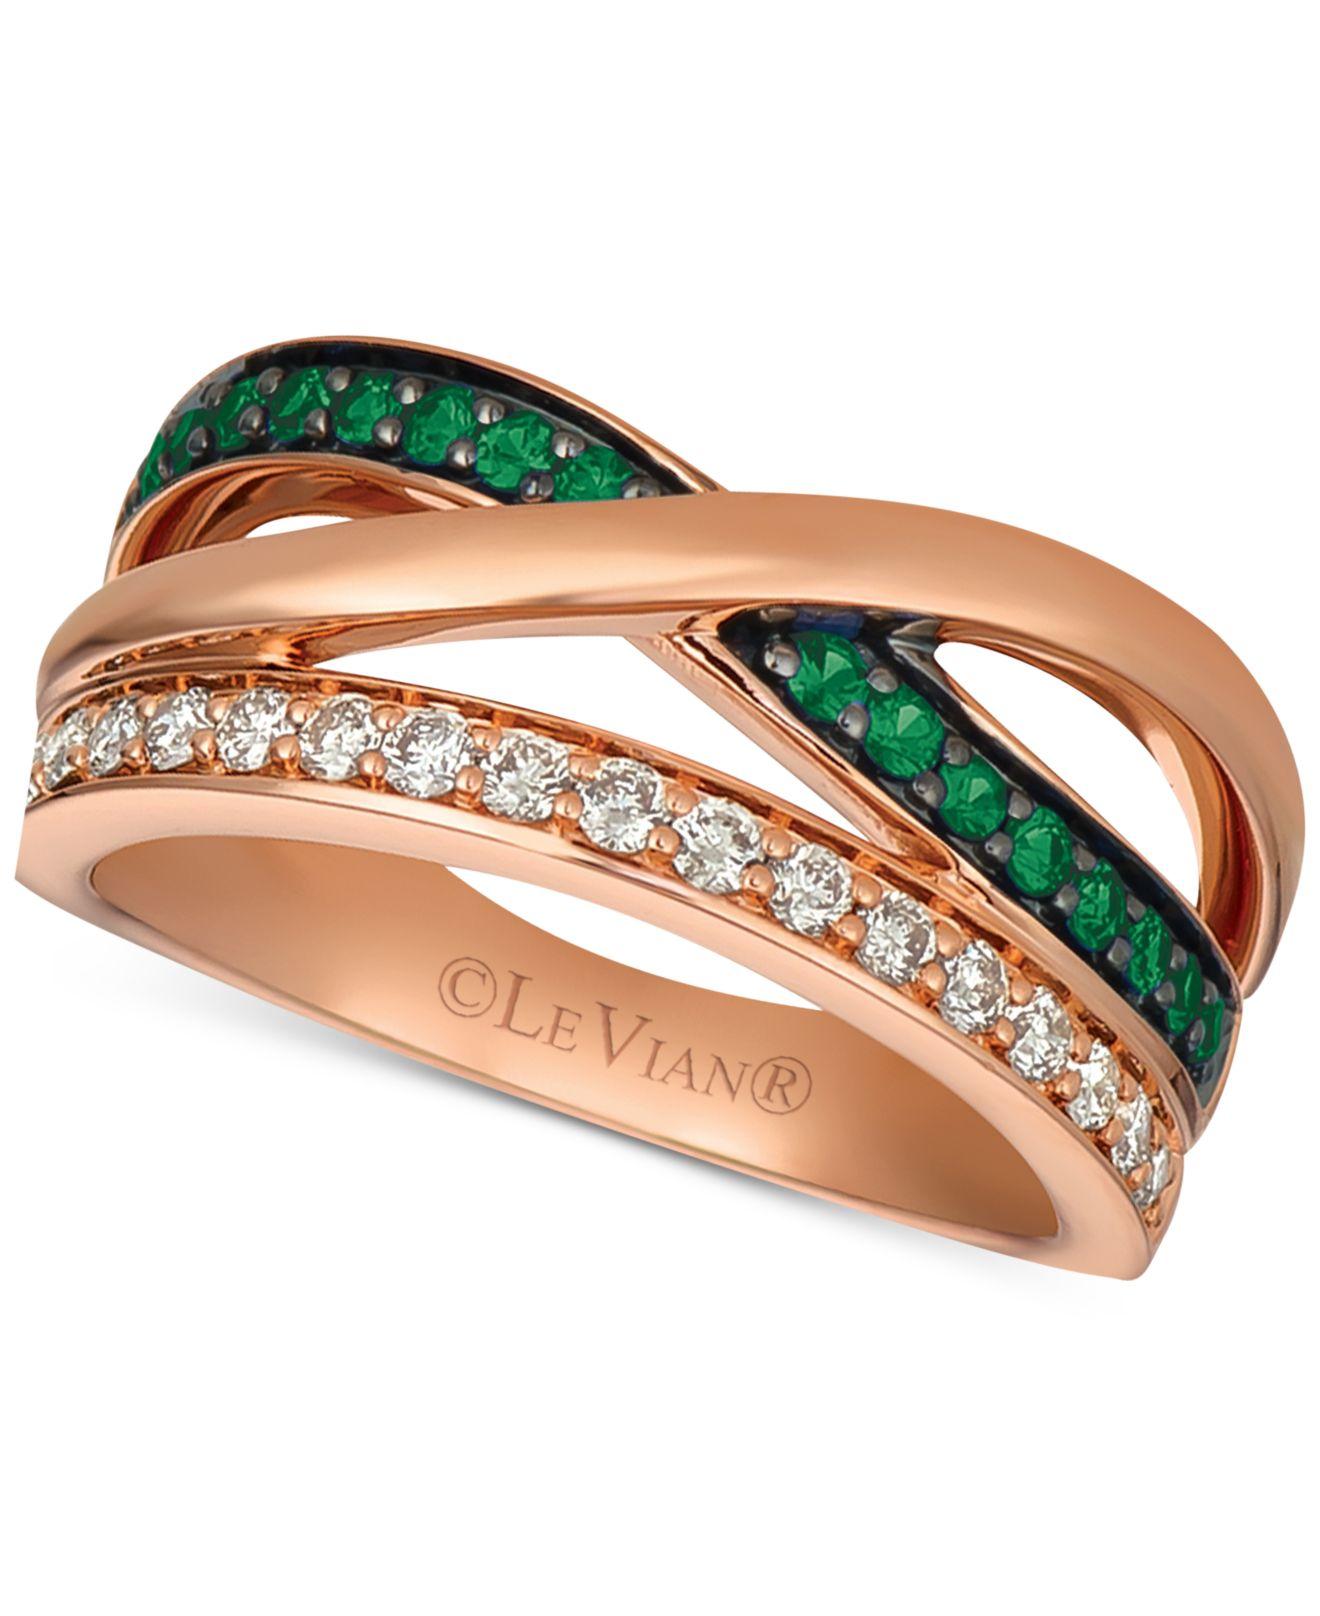 Le Vian Emerald Emerald 15 Ct Tw Diamond 14 Ct Tw Ring In 14k Rose Gold Also Available In Sapphire 